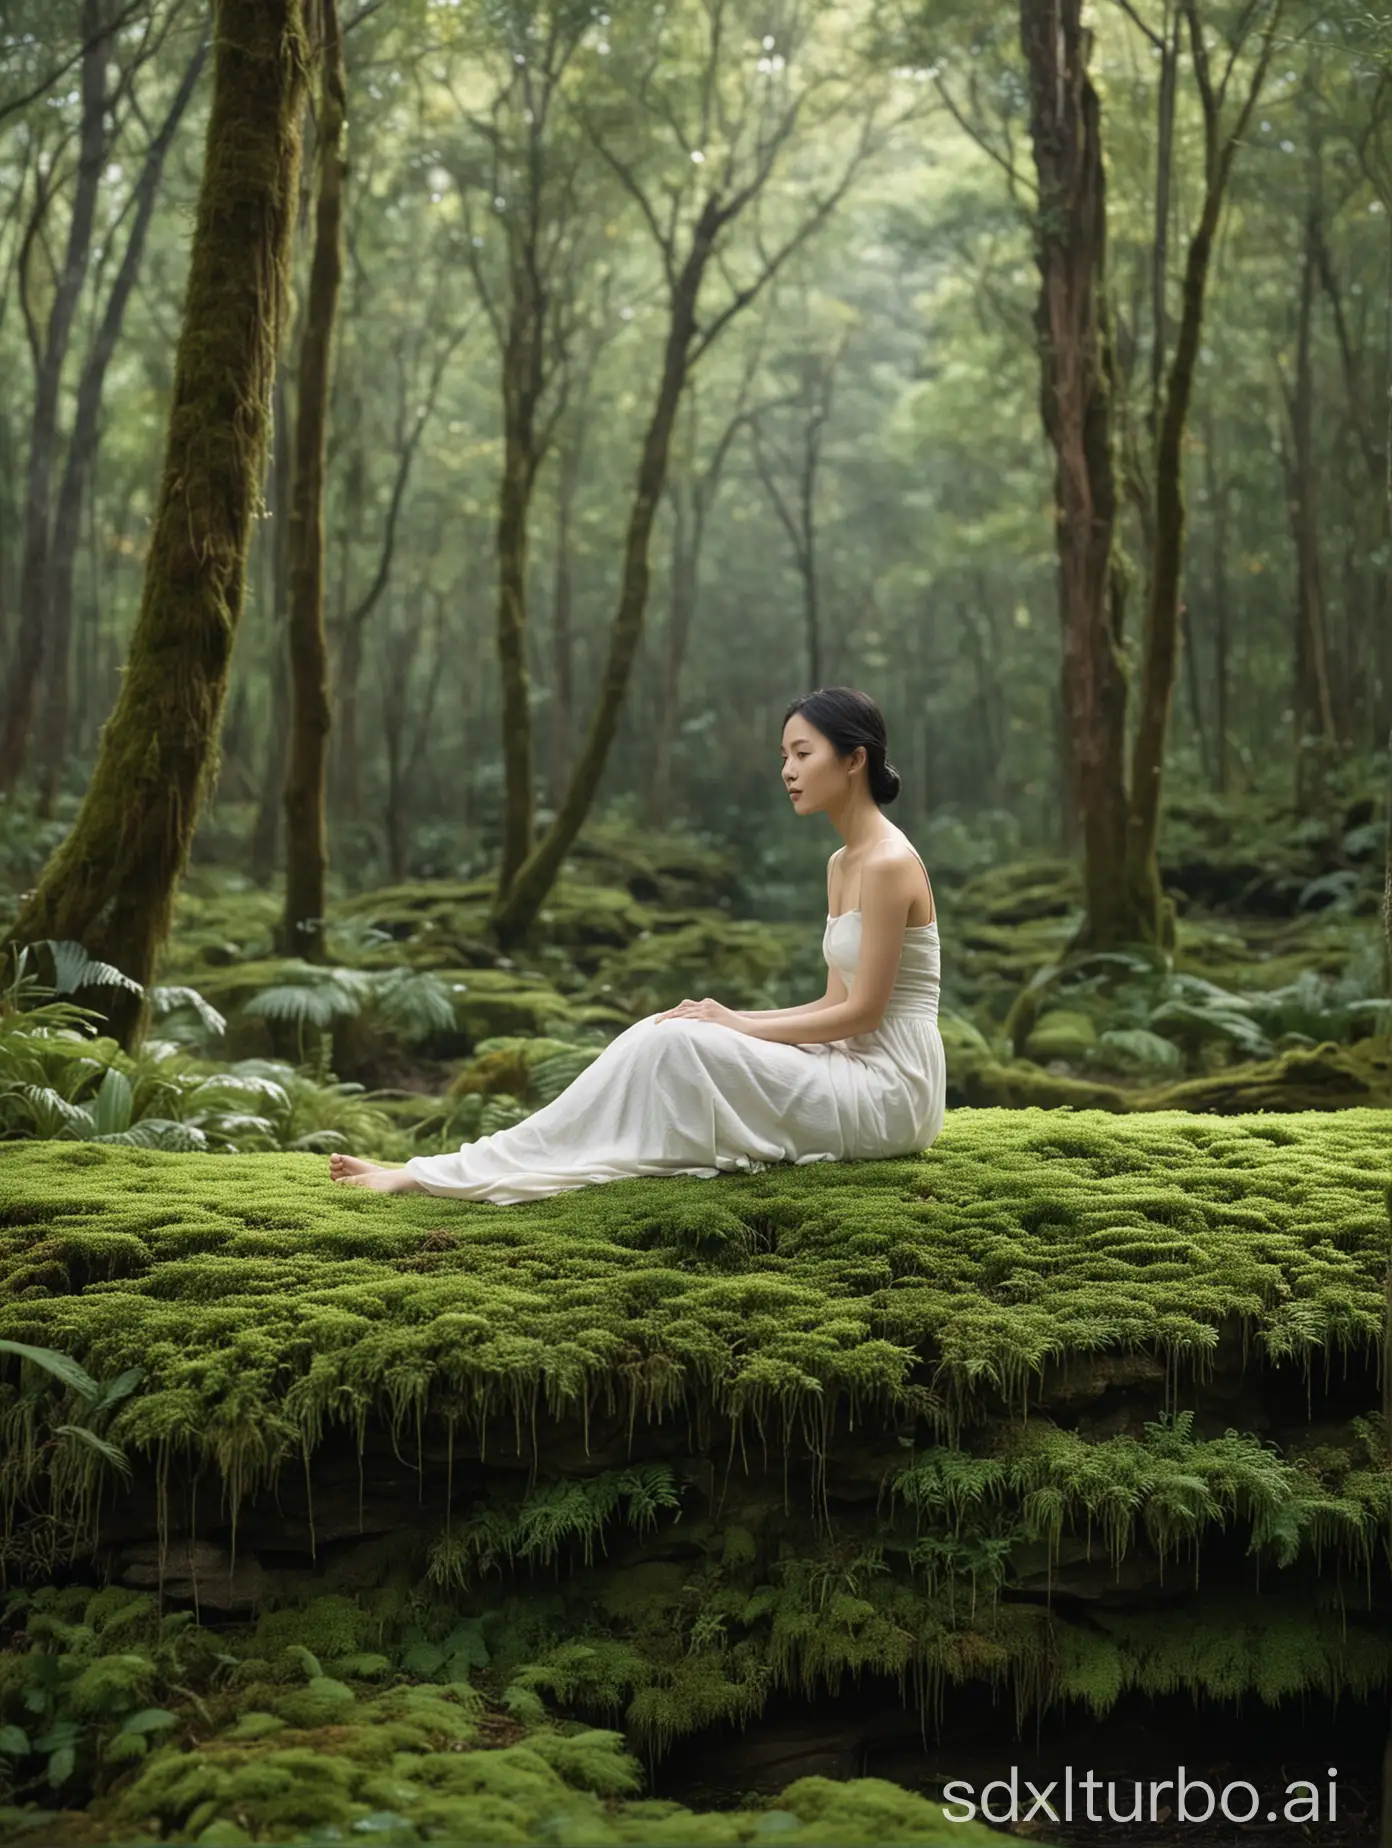 A serene scene features a fair-skinned Asian woman sitting in profile on a moss-covered platform...